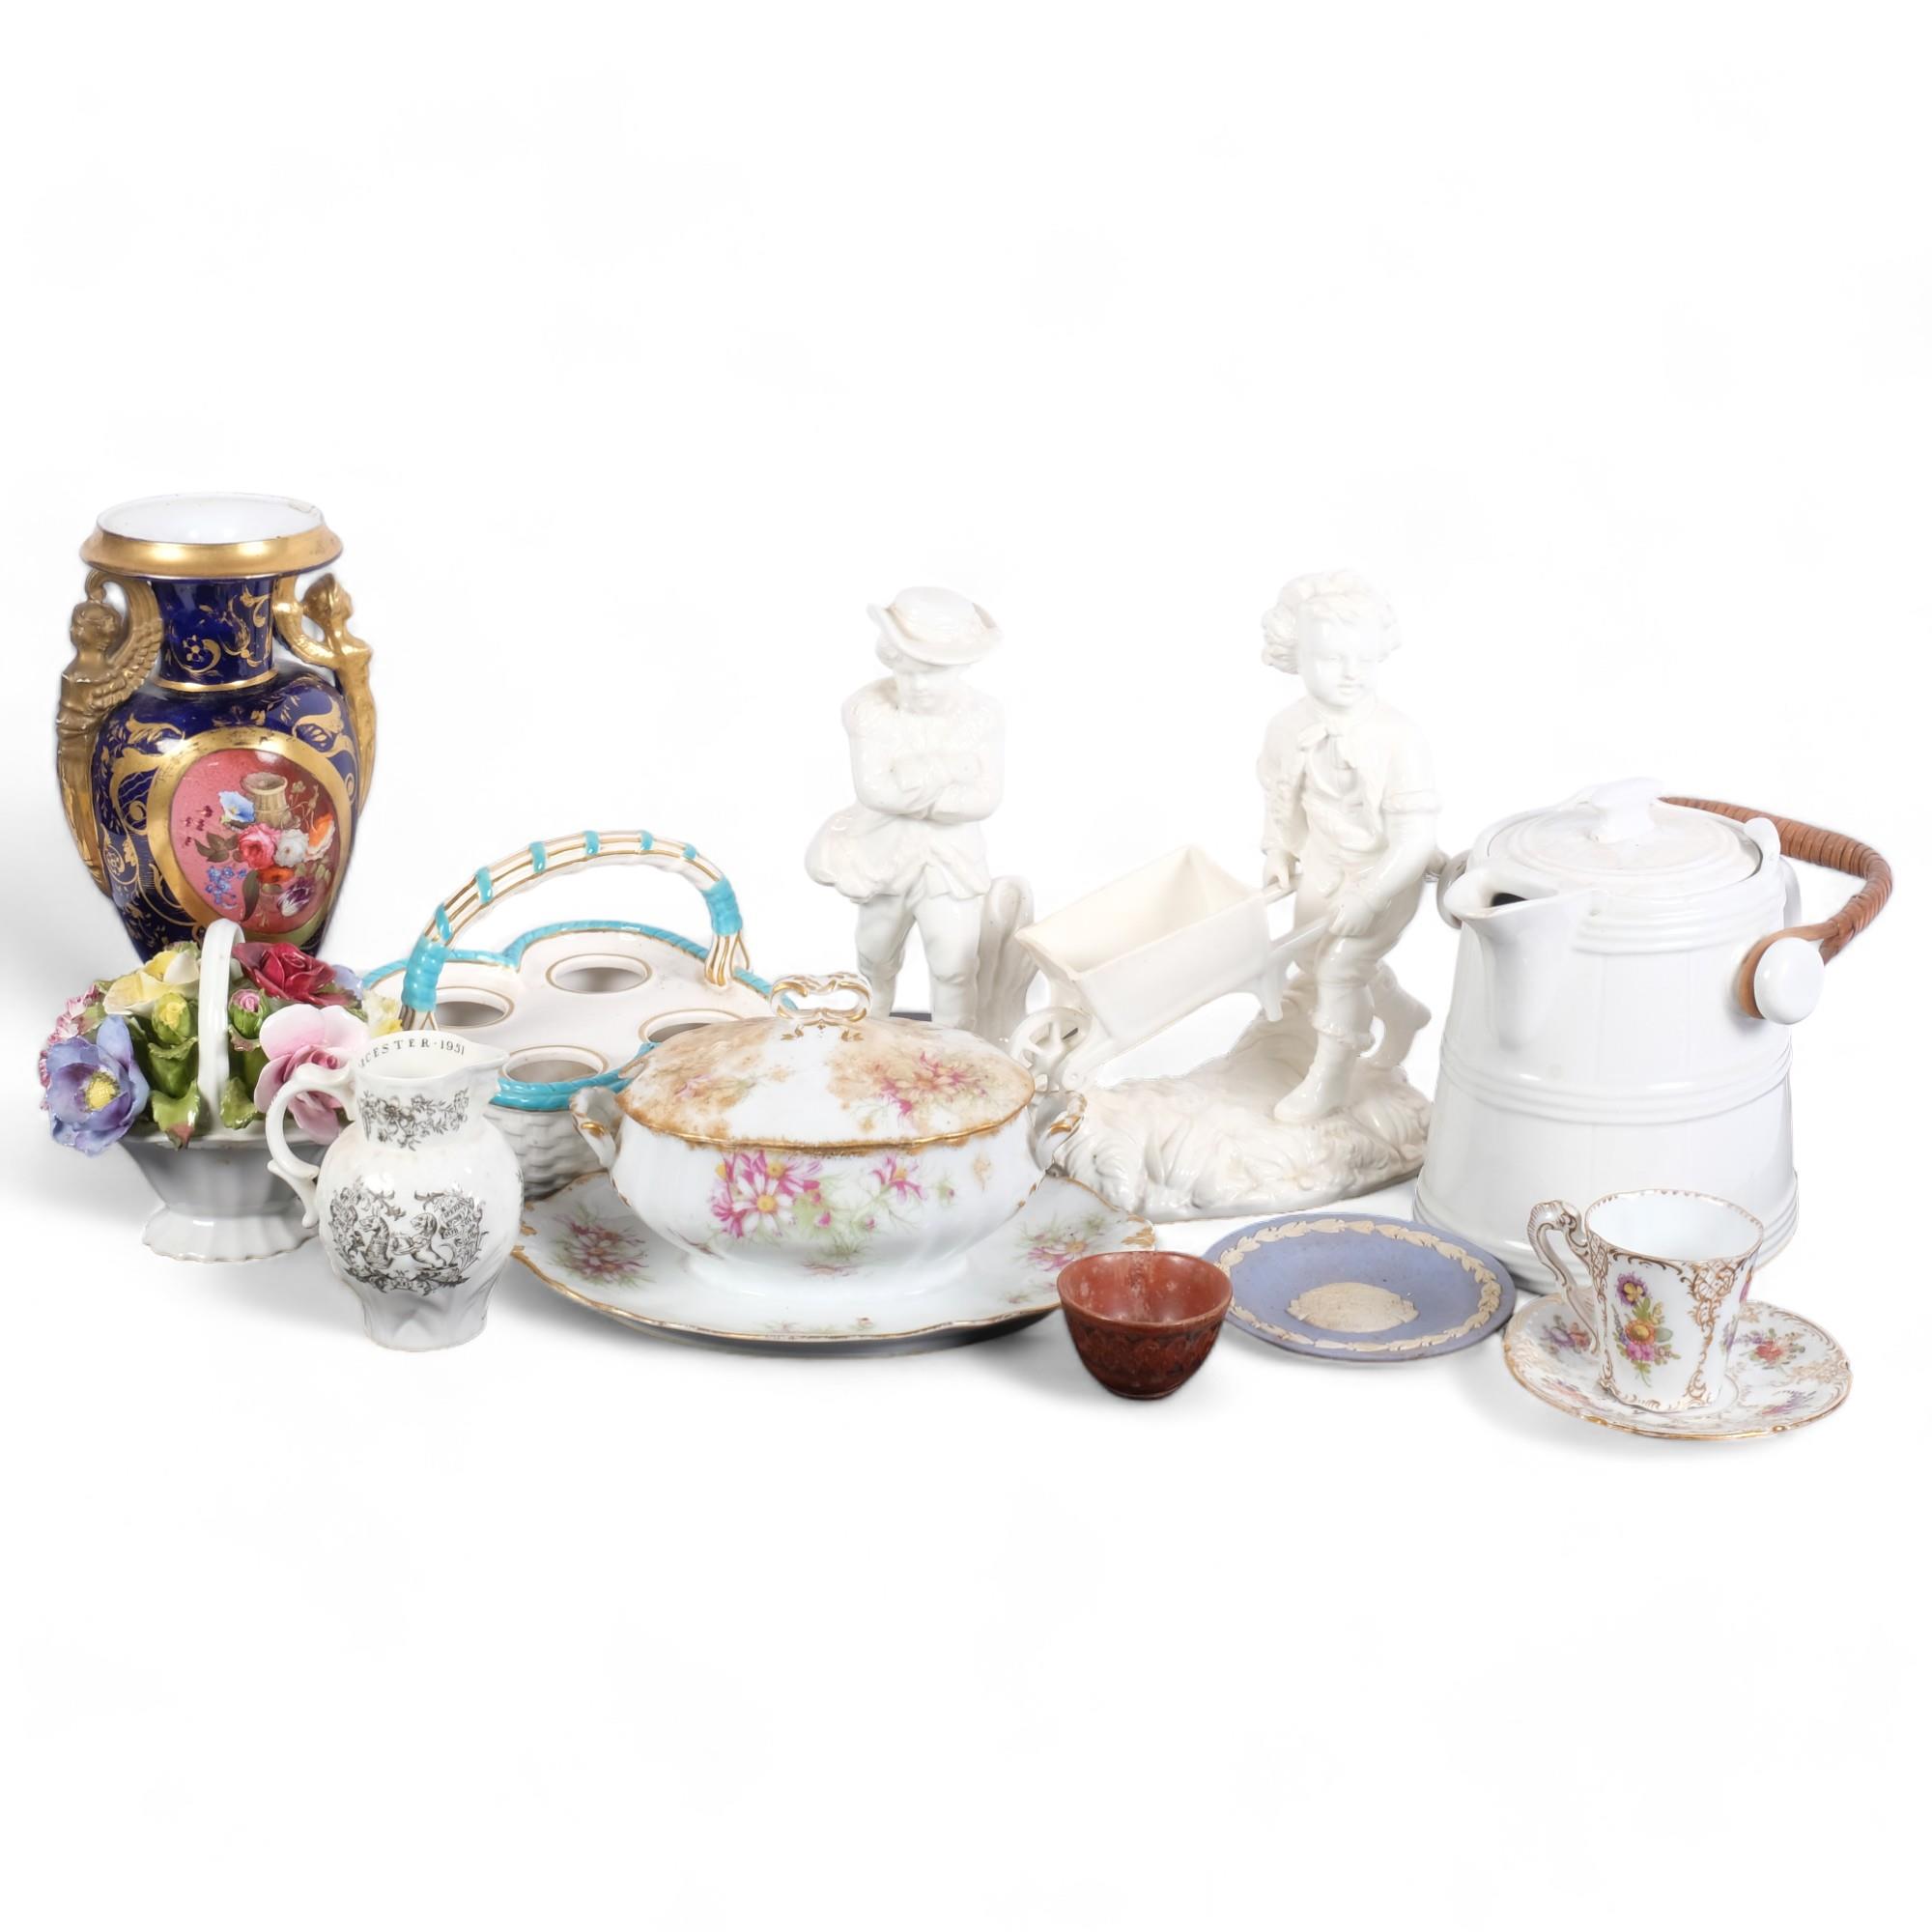 A Victorian porcelain child with wheelbarrow, Davenport egg stand, Dresden cup and saucer, etc